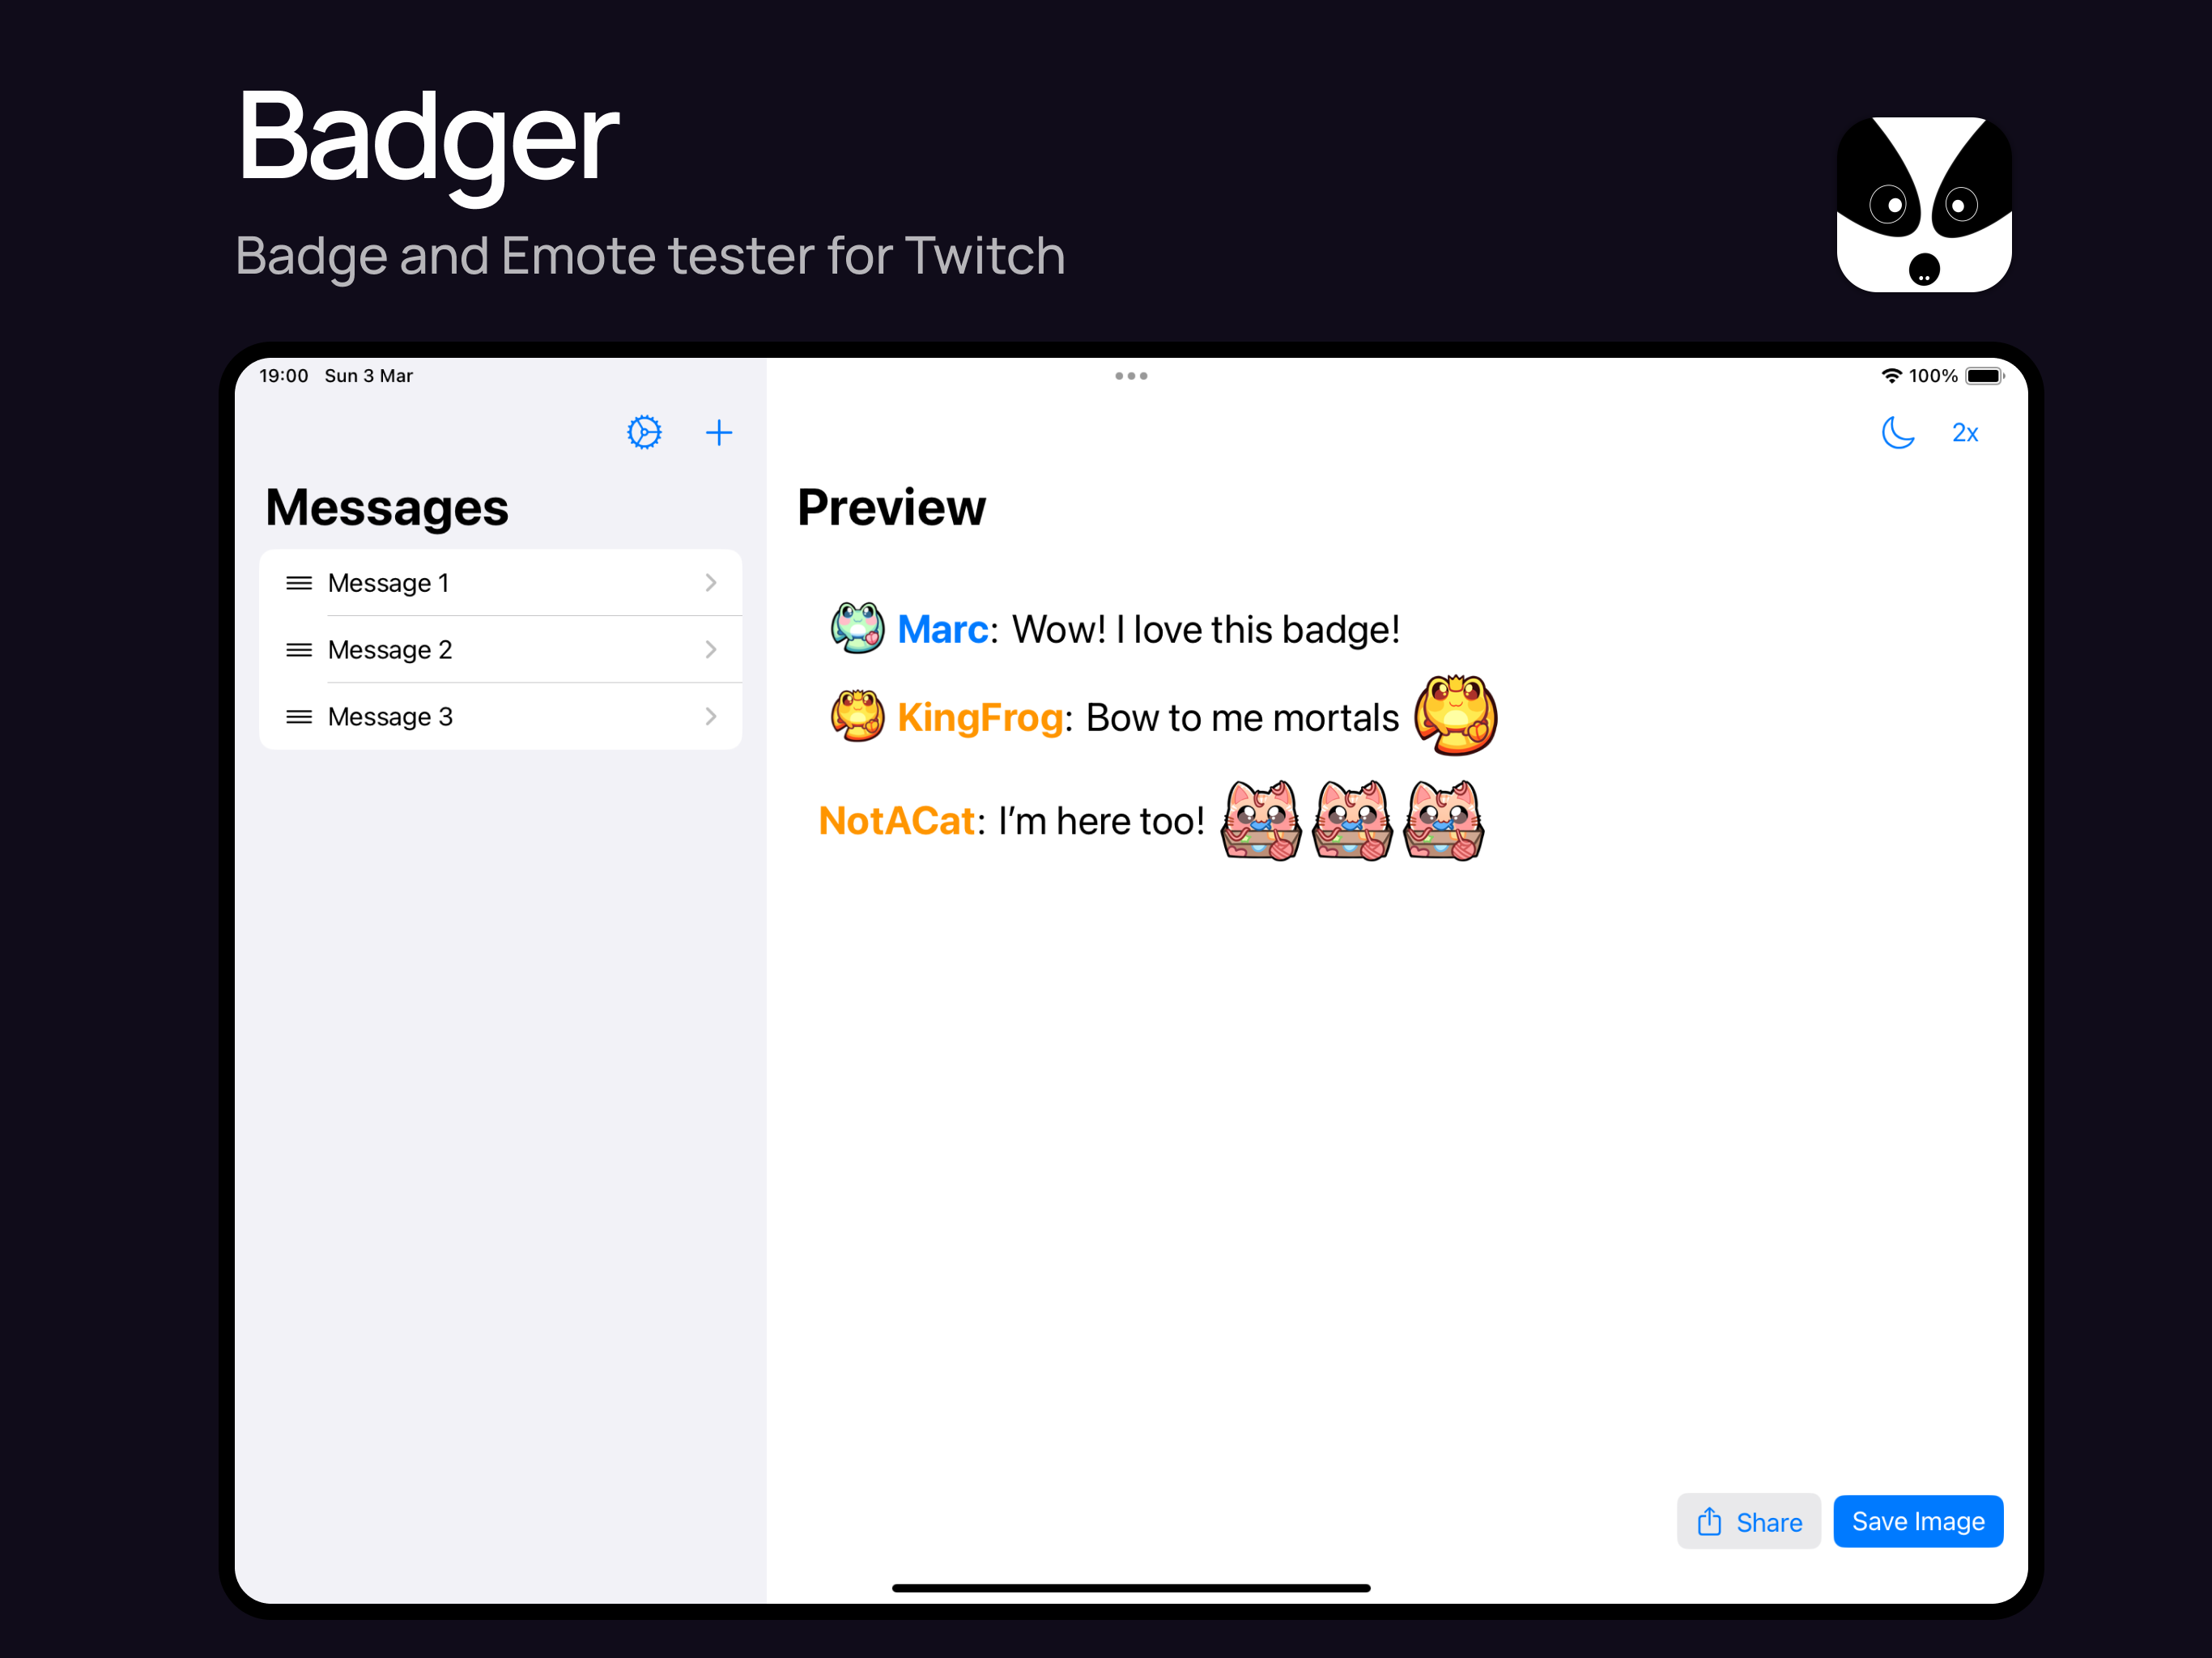 Screenshot of the Badger app, showing 3 Twitch chat previews with custom badges and emotes